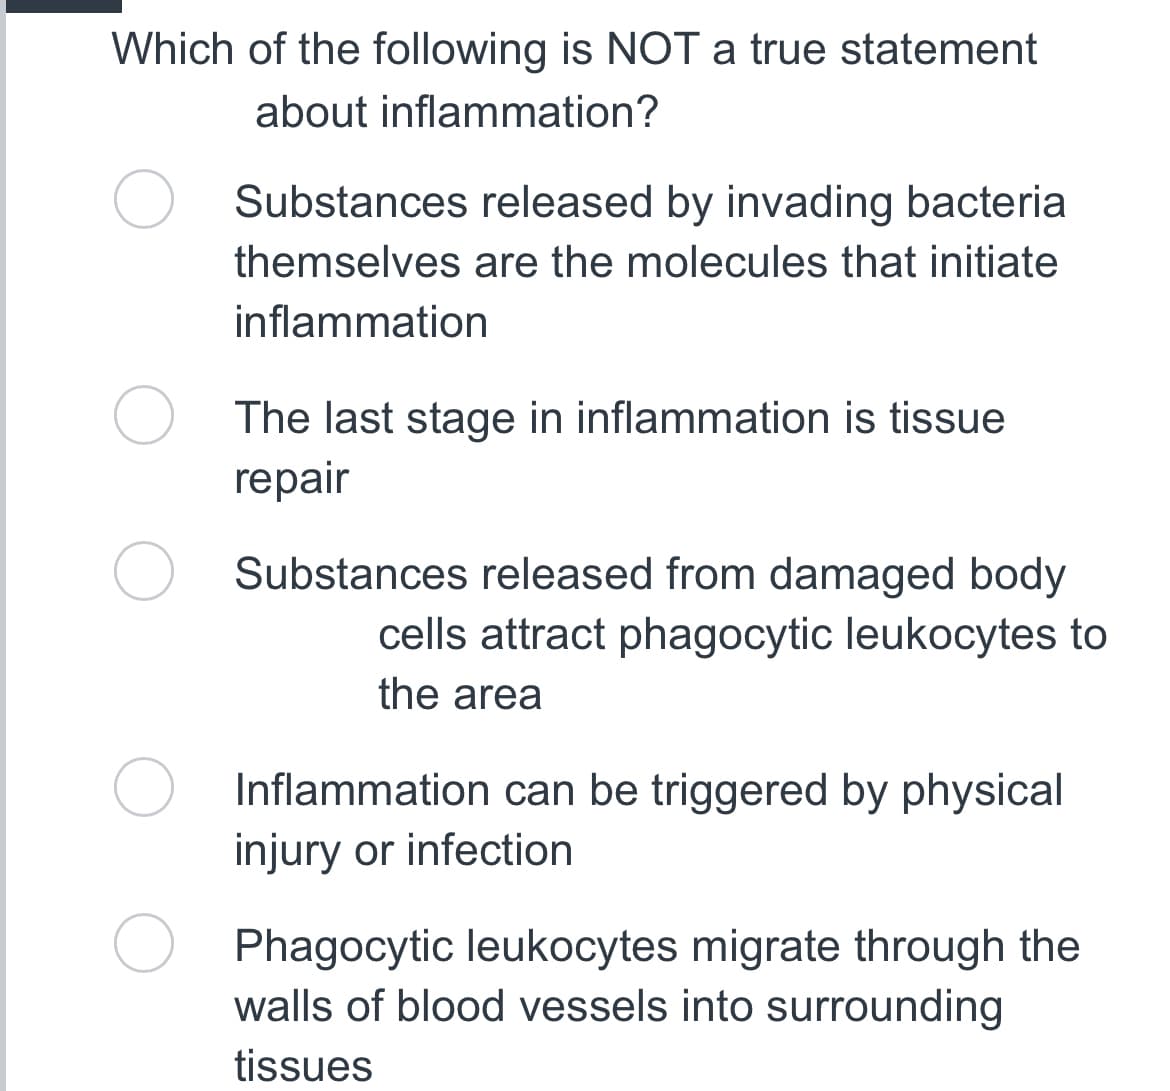 Which of the following is NOT a true statement
about inflammation?
Substances released by invading bacteria
themselves are the molecules that initiate
inflammation
The last stage in inflammation is tissue
repair
Substances released from damaged body
cells attract phagocytic leukocytes to
the area
Inflammation can be triggered by physical
injury or infection
Phagocytic leukocytes migrate through the
walls of blood vessels into surrounding
tissues